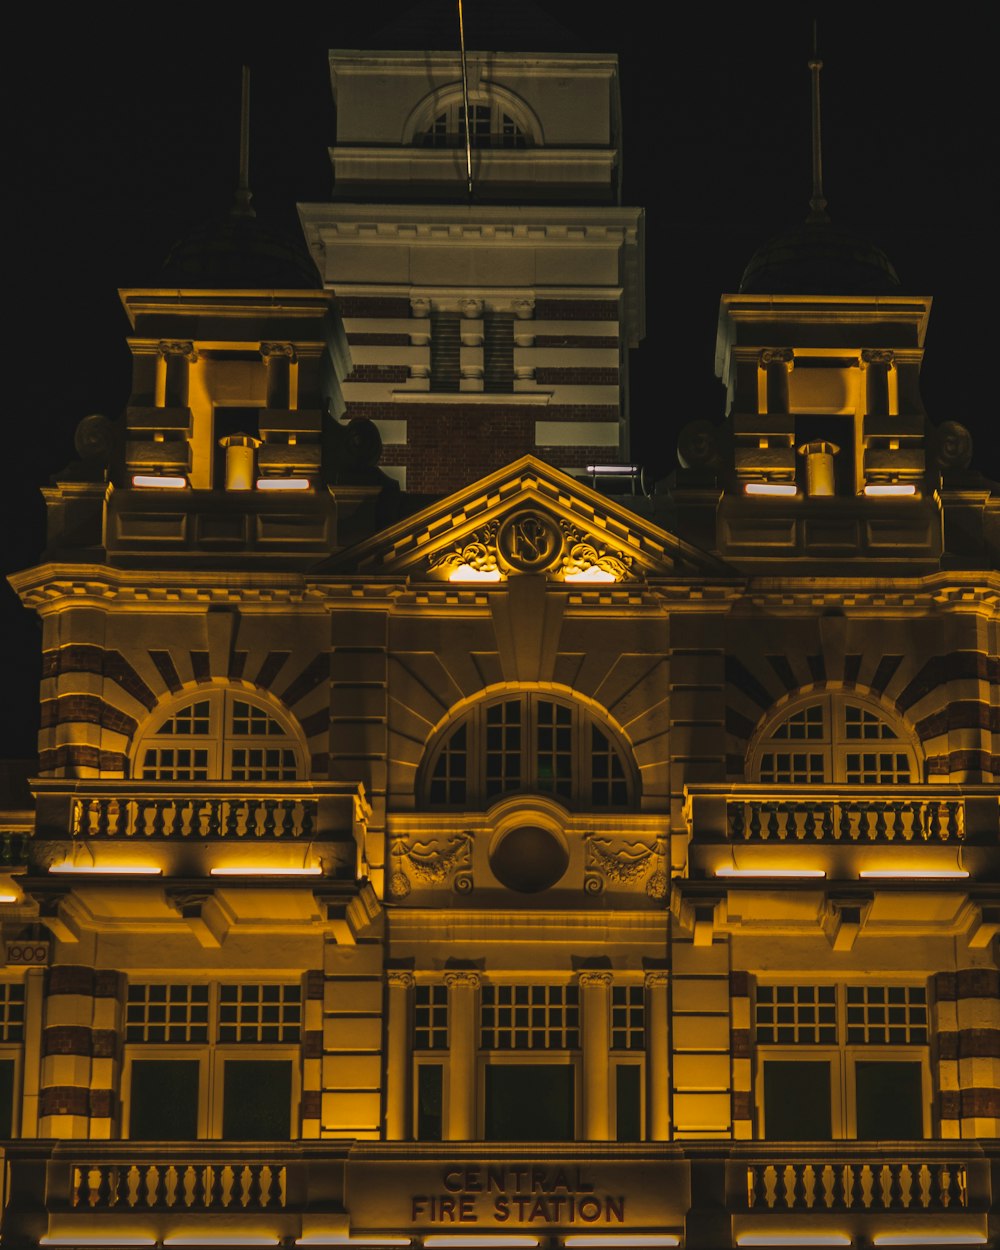 a building lit up at night with a clock tower in the background